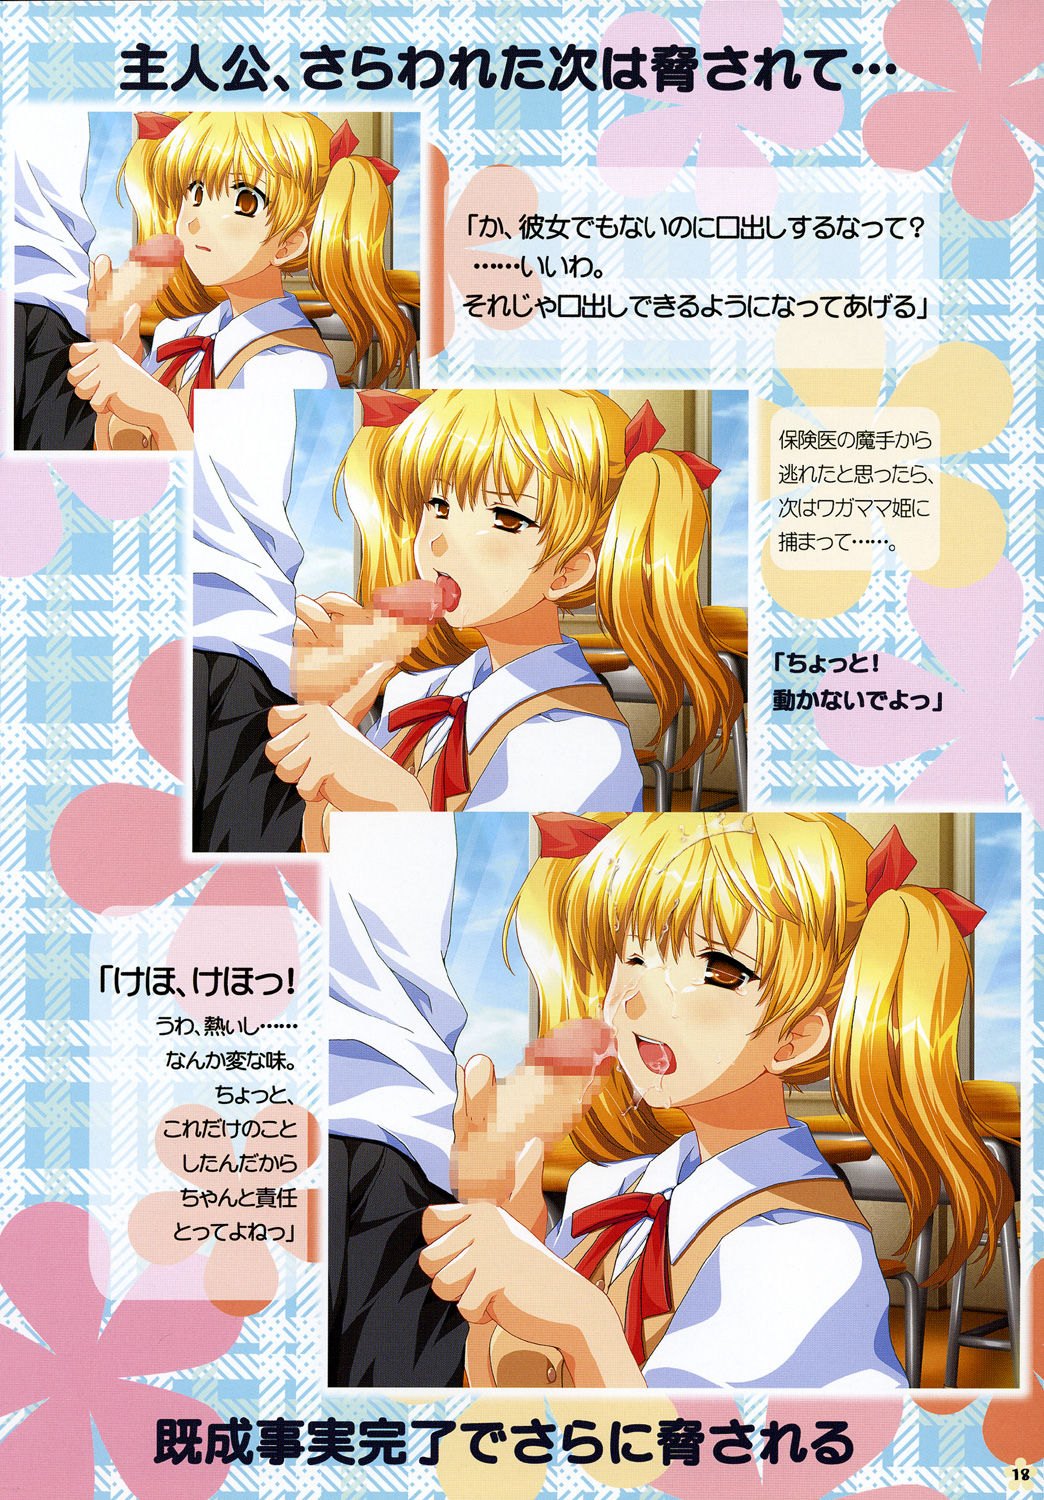 [AKABEi SOFT] SCHOOL×SCHOLL Visual Guide page 17 full